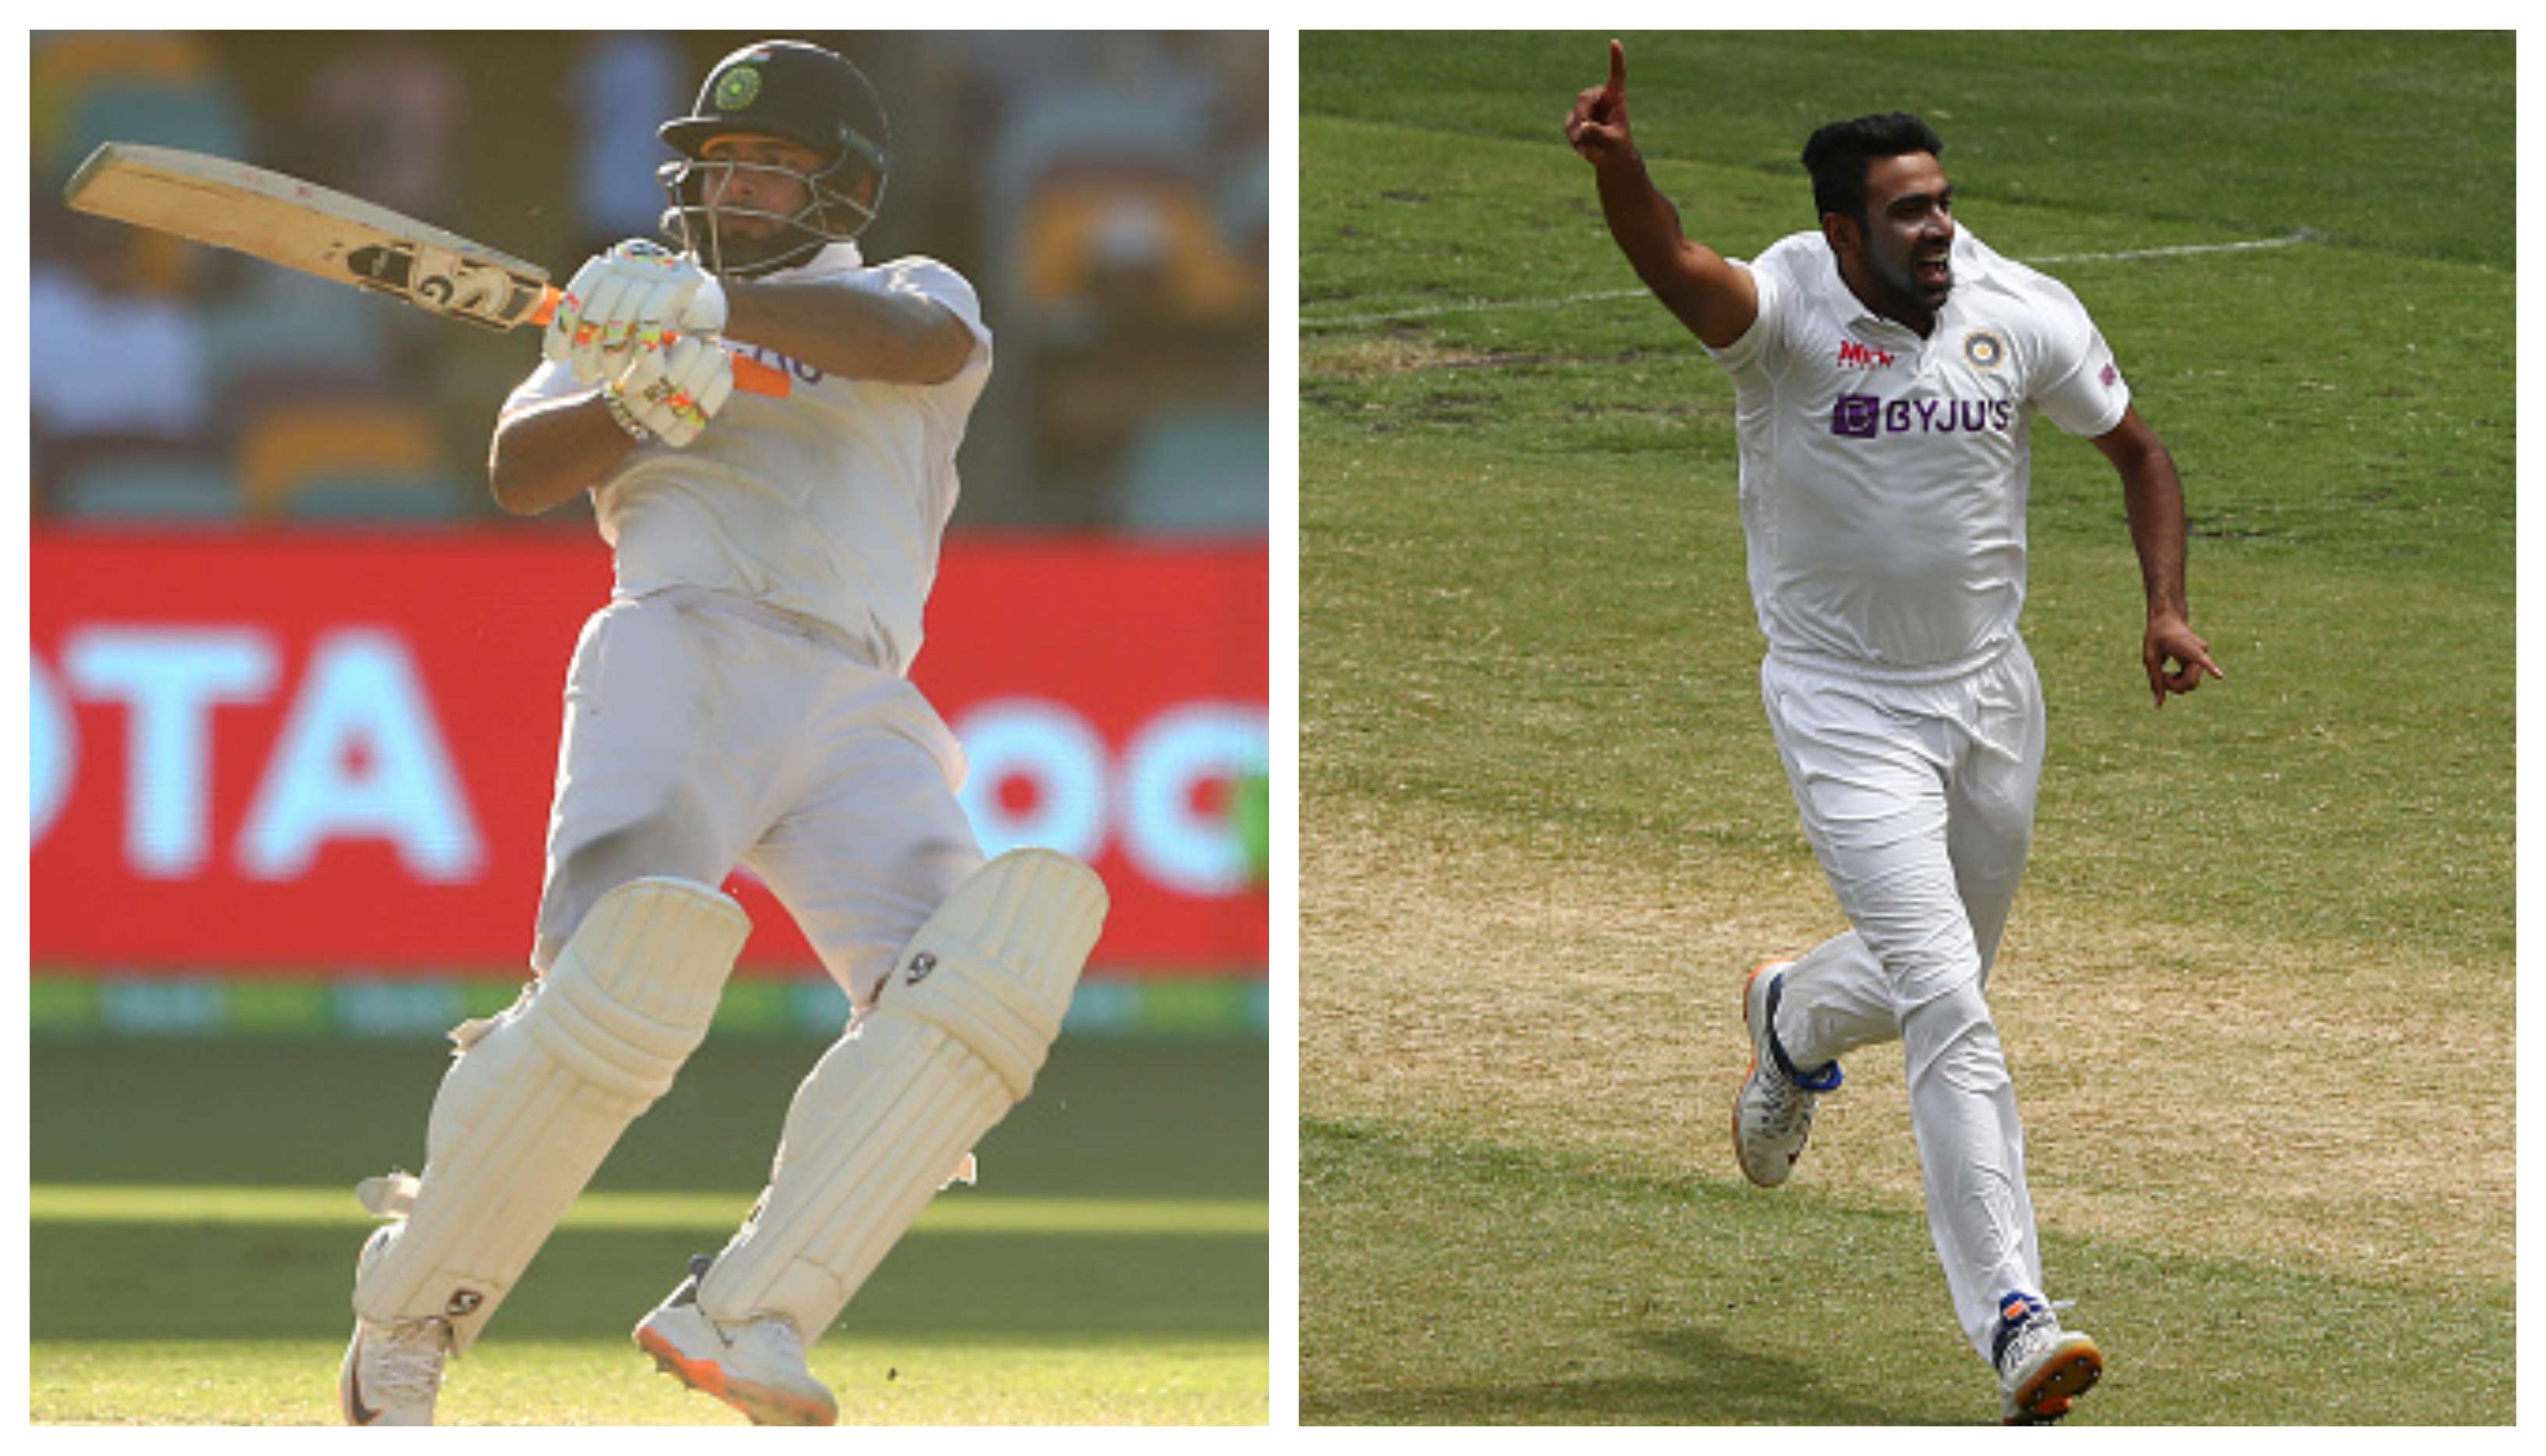 Pant and Ashwin played a key role in India's Test series win Down Under | Getty